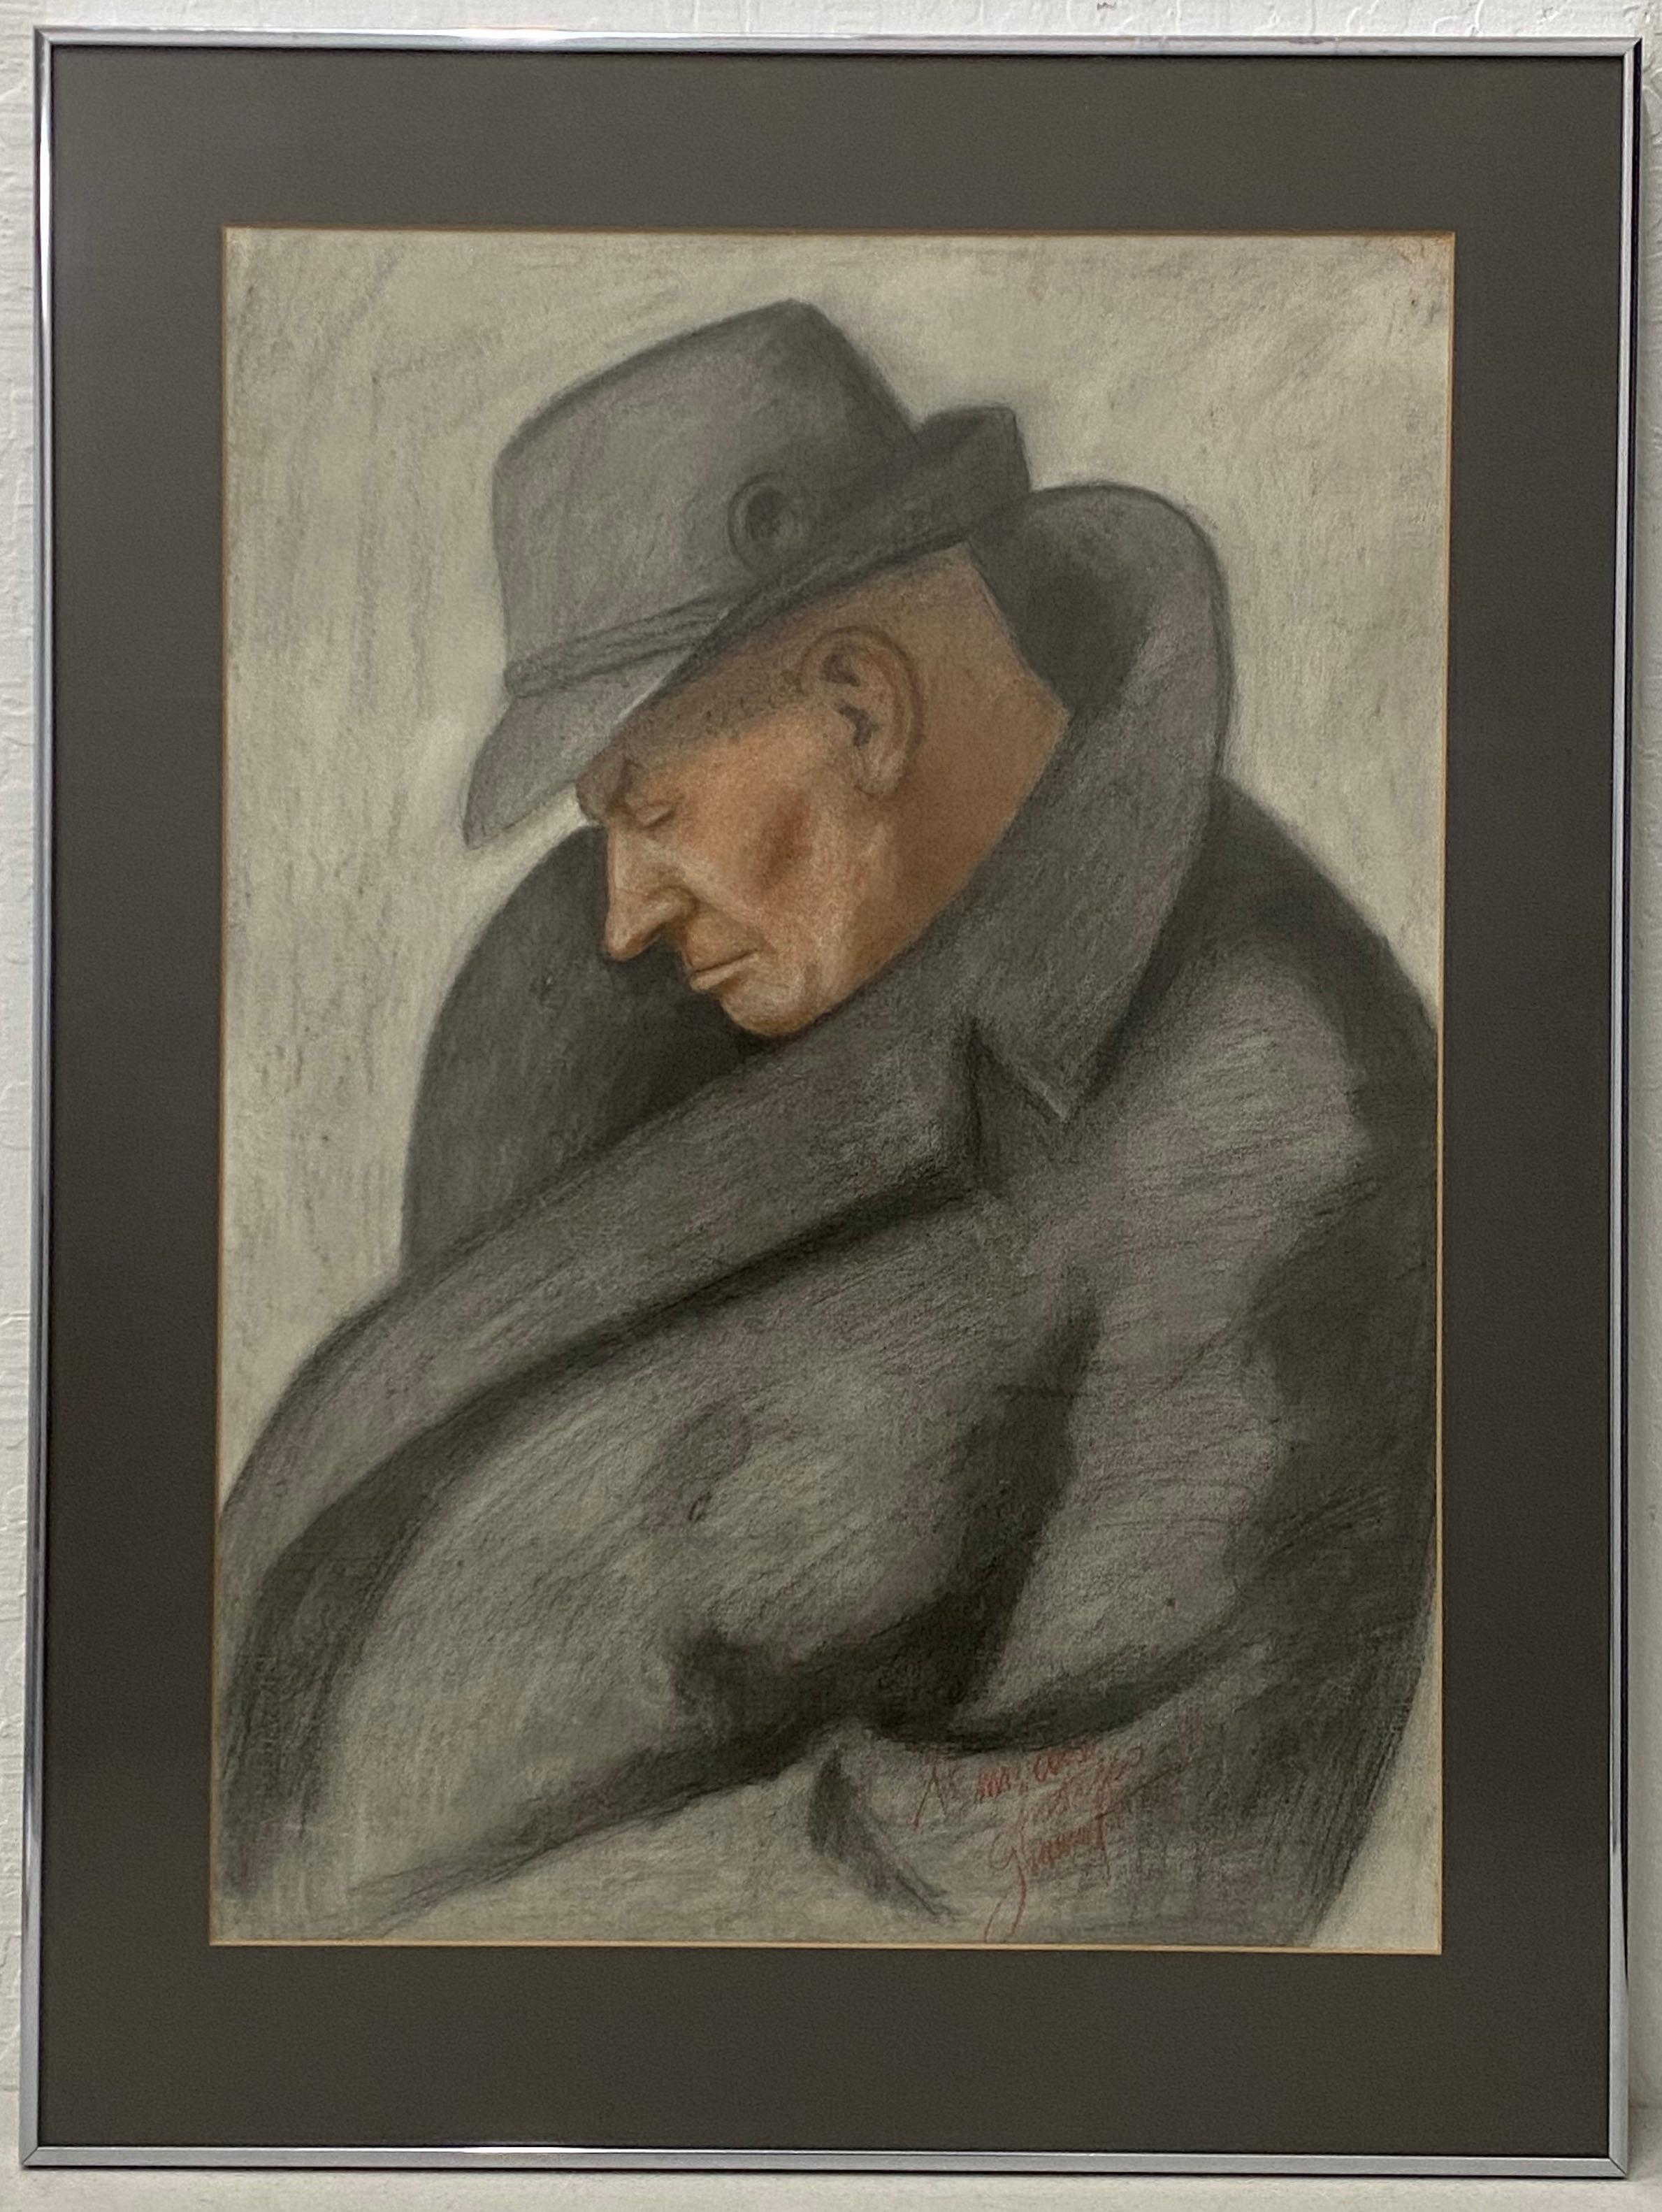 Vintage Charcoal Portrait of a Sleeping Man in an Overcoat c.1940 - Art by Unknown